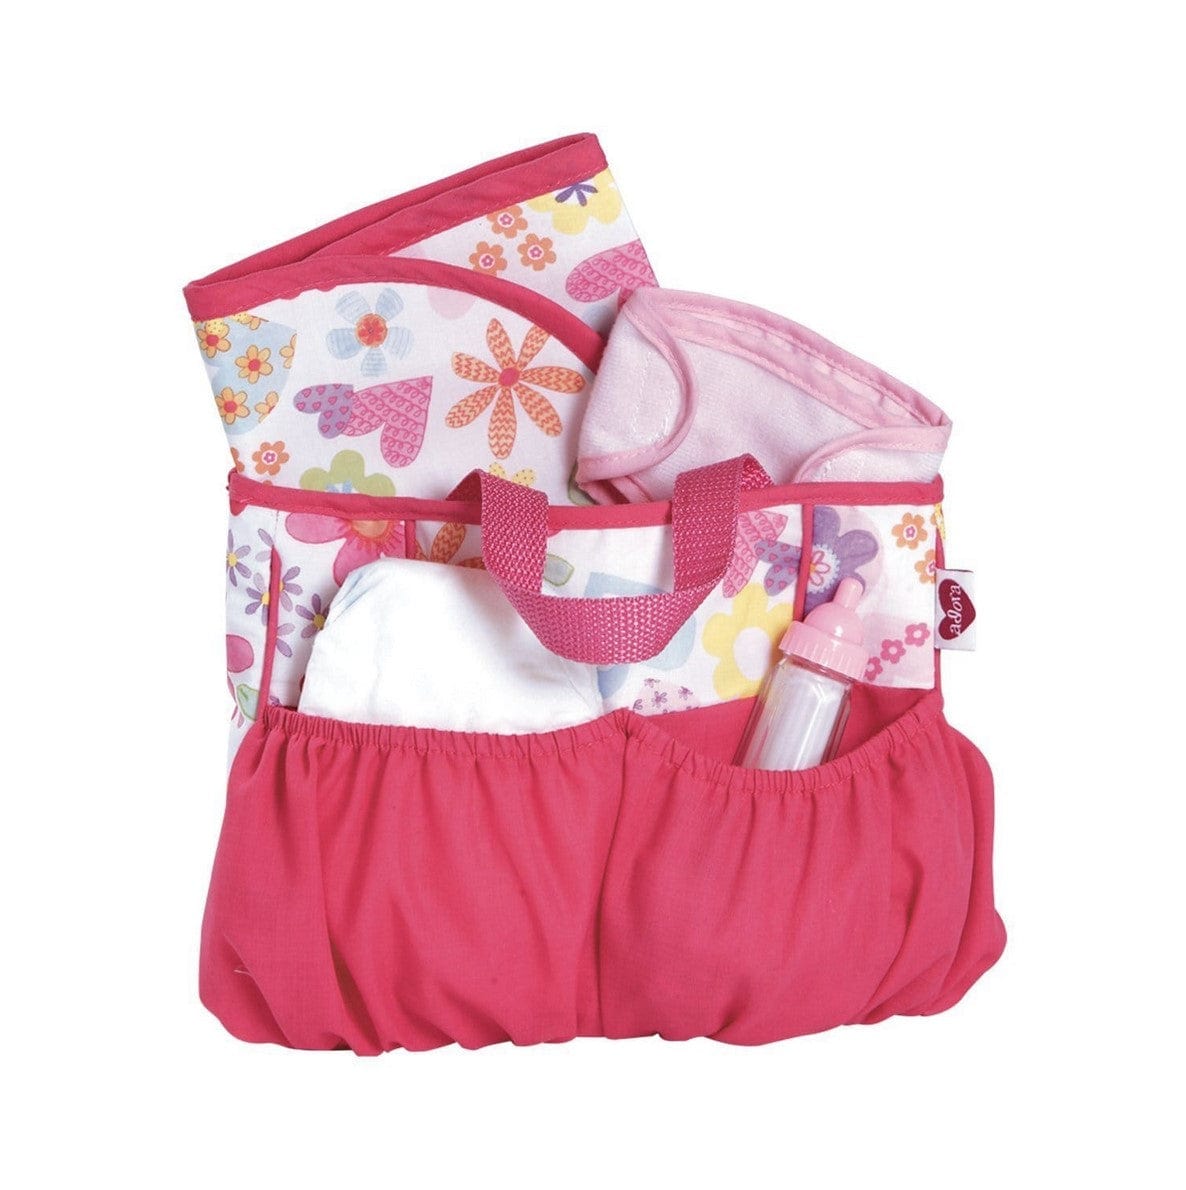 Adora Toys Soft Dolls Diaper Bag with Accessories